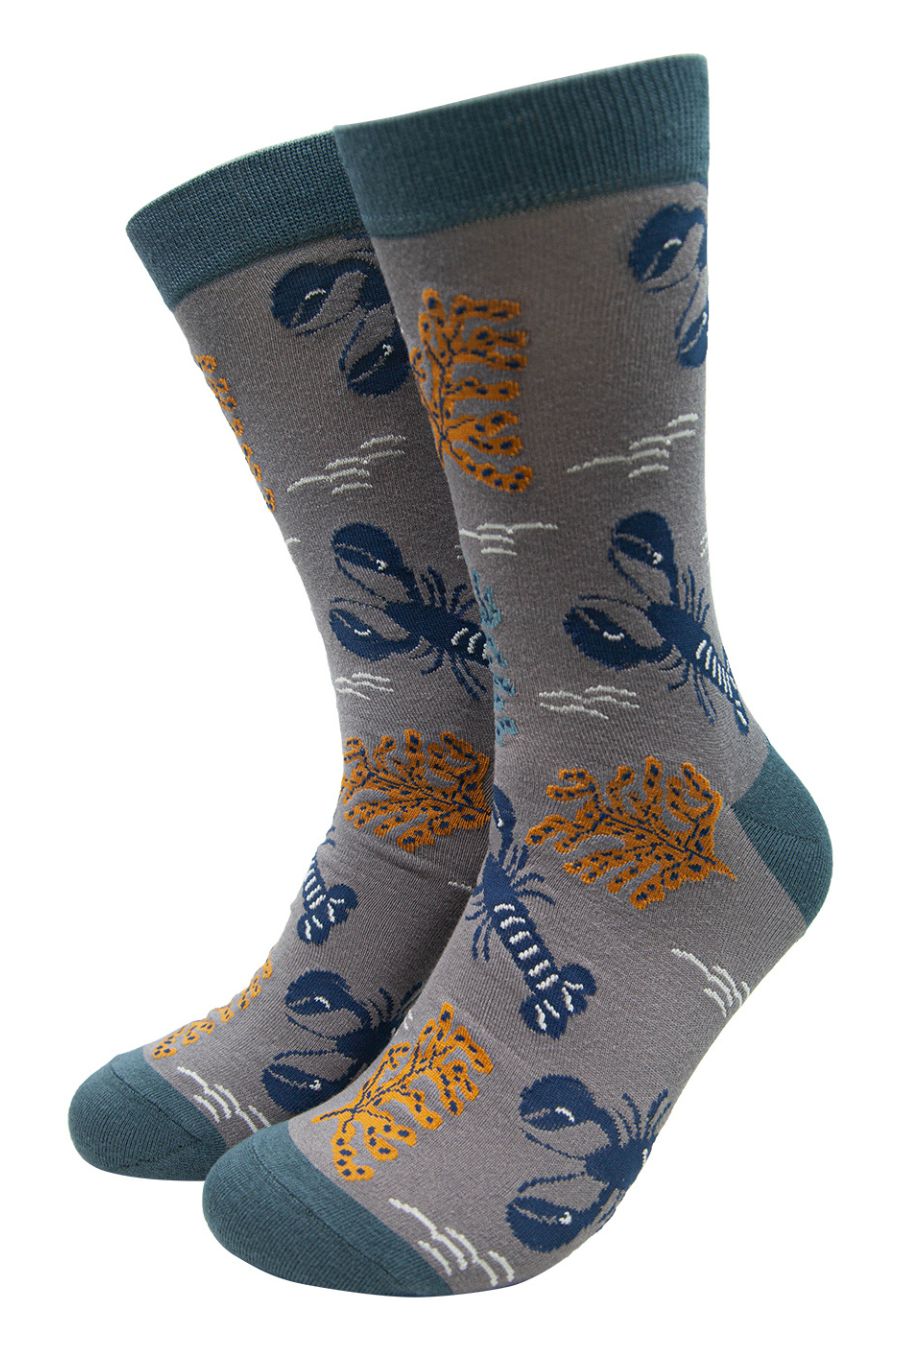 grey dress socks with blue lobsters and yellow seaweed pattern